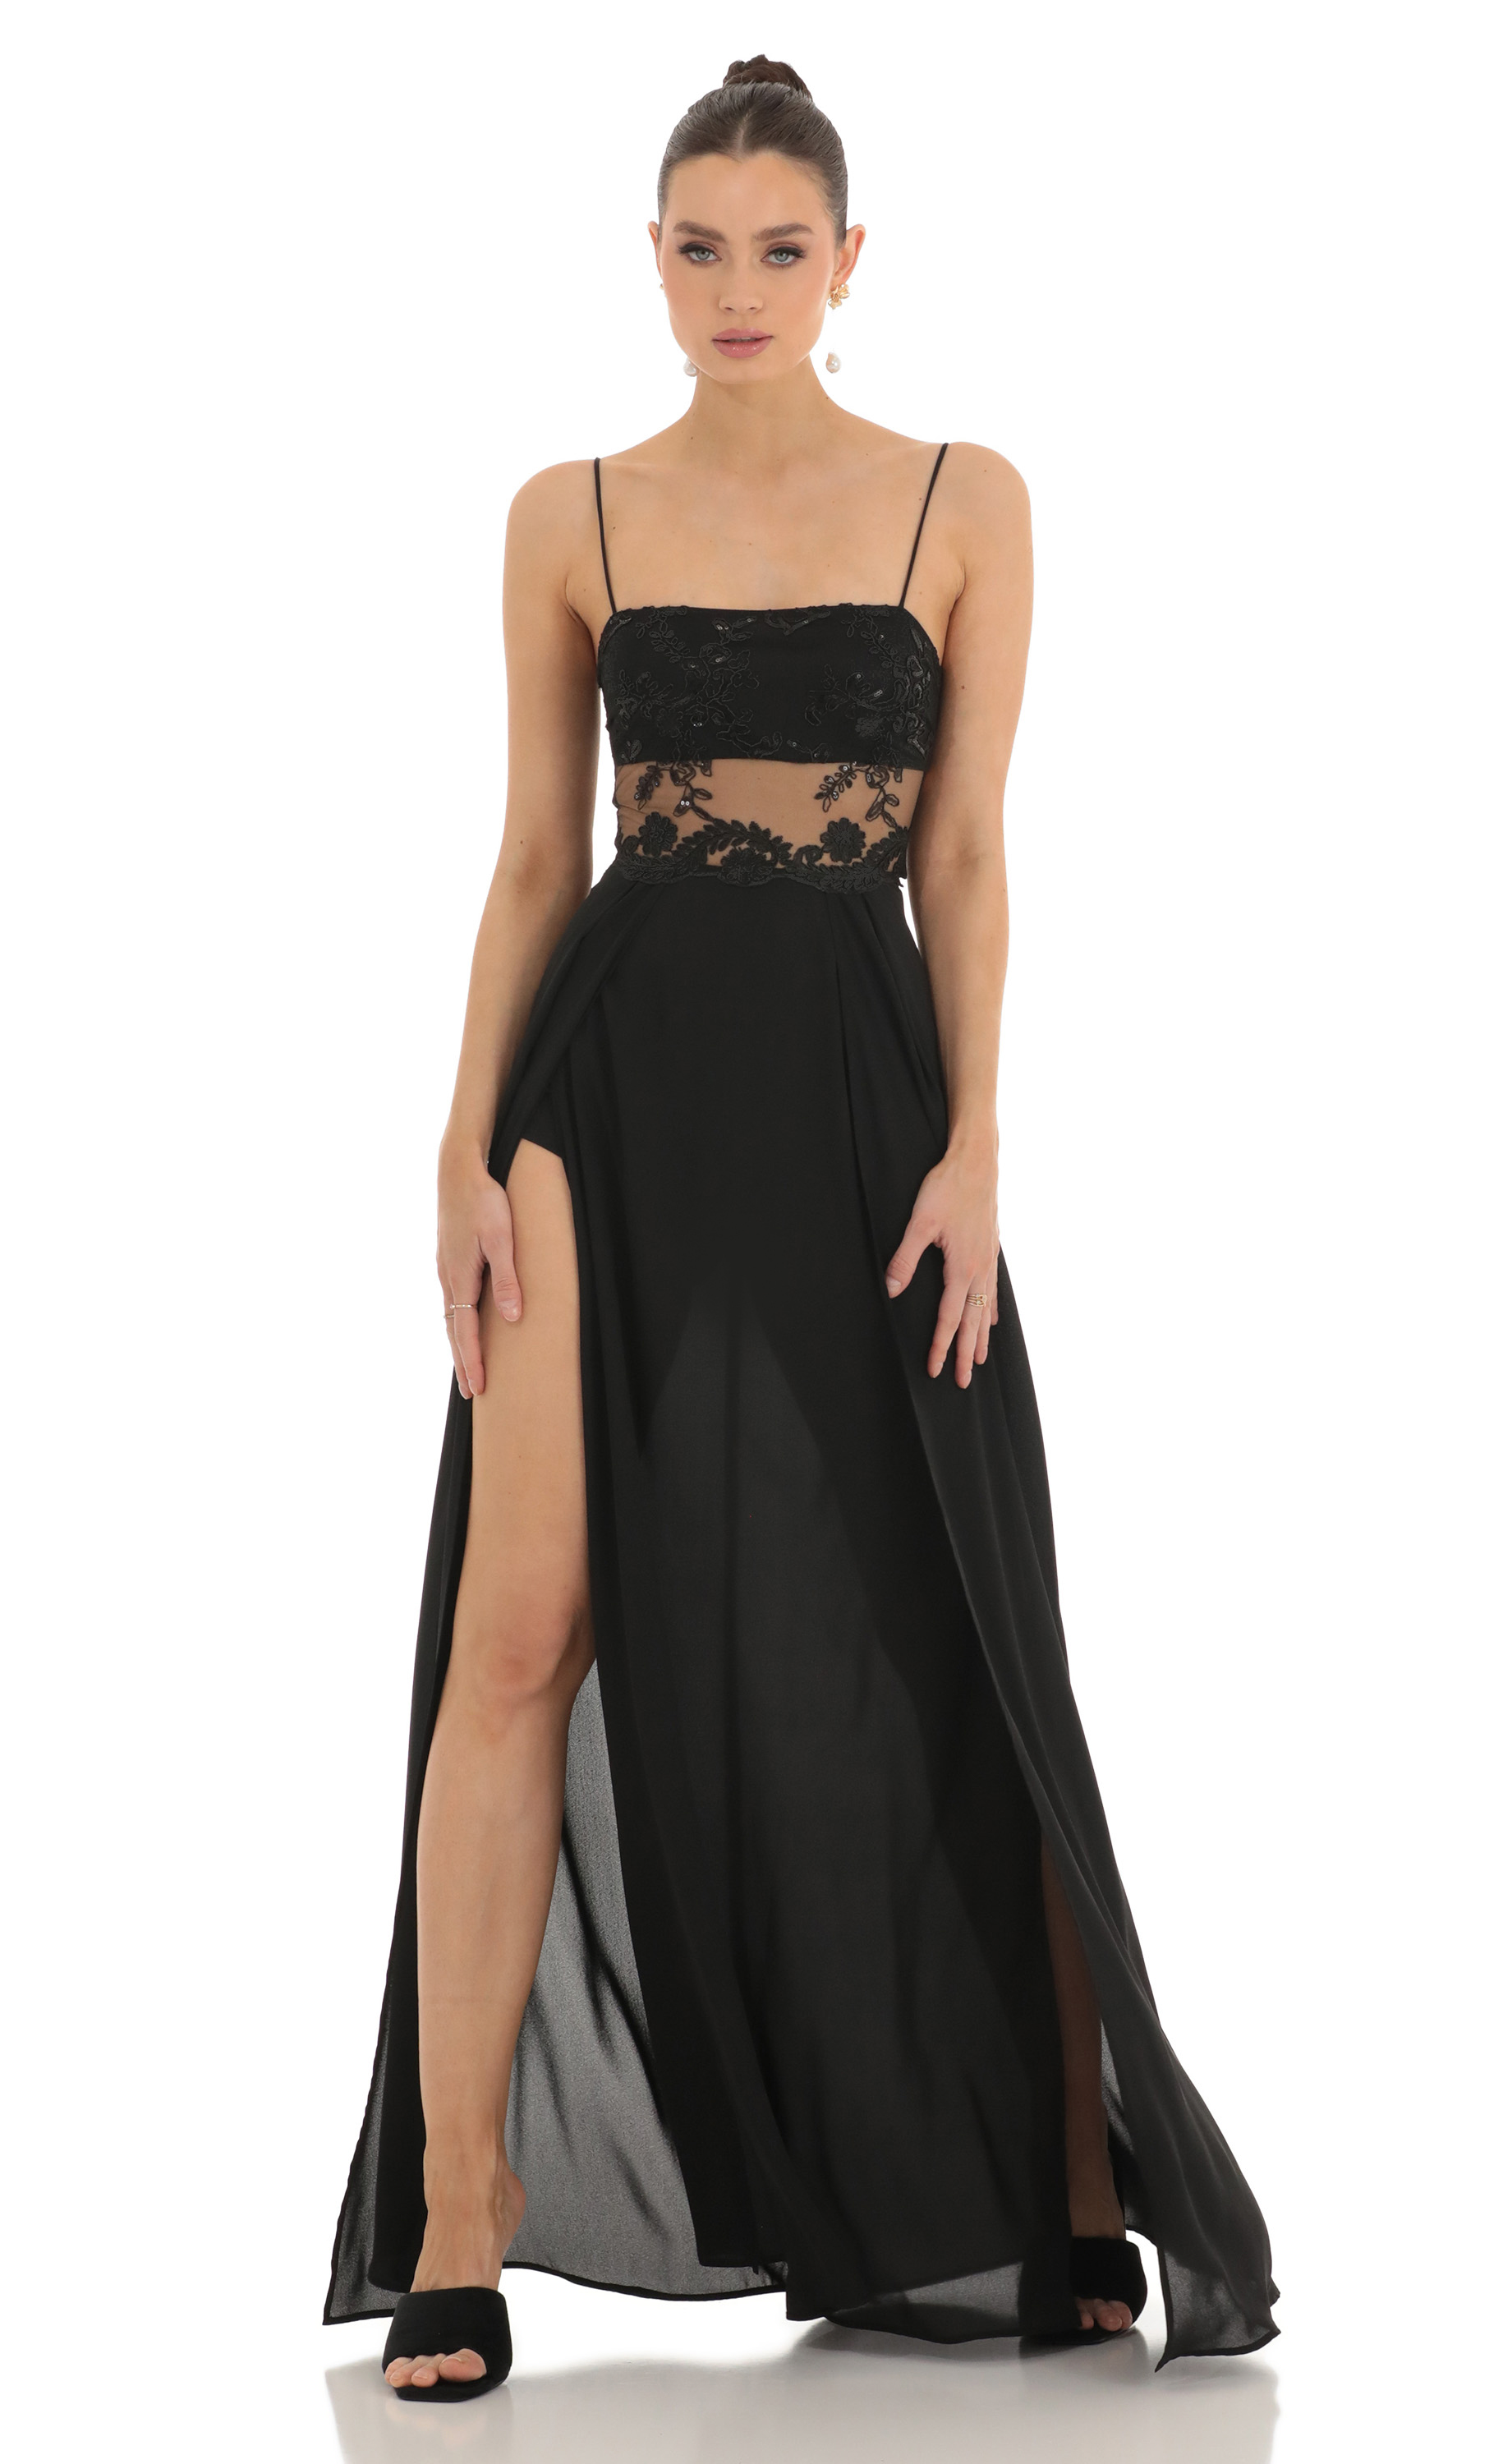 Kingsley Lace Sequin Maxi Dress in Black